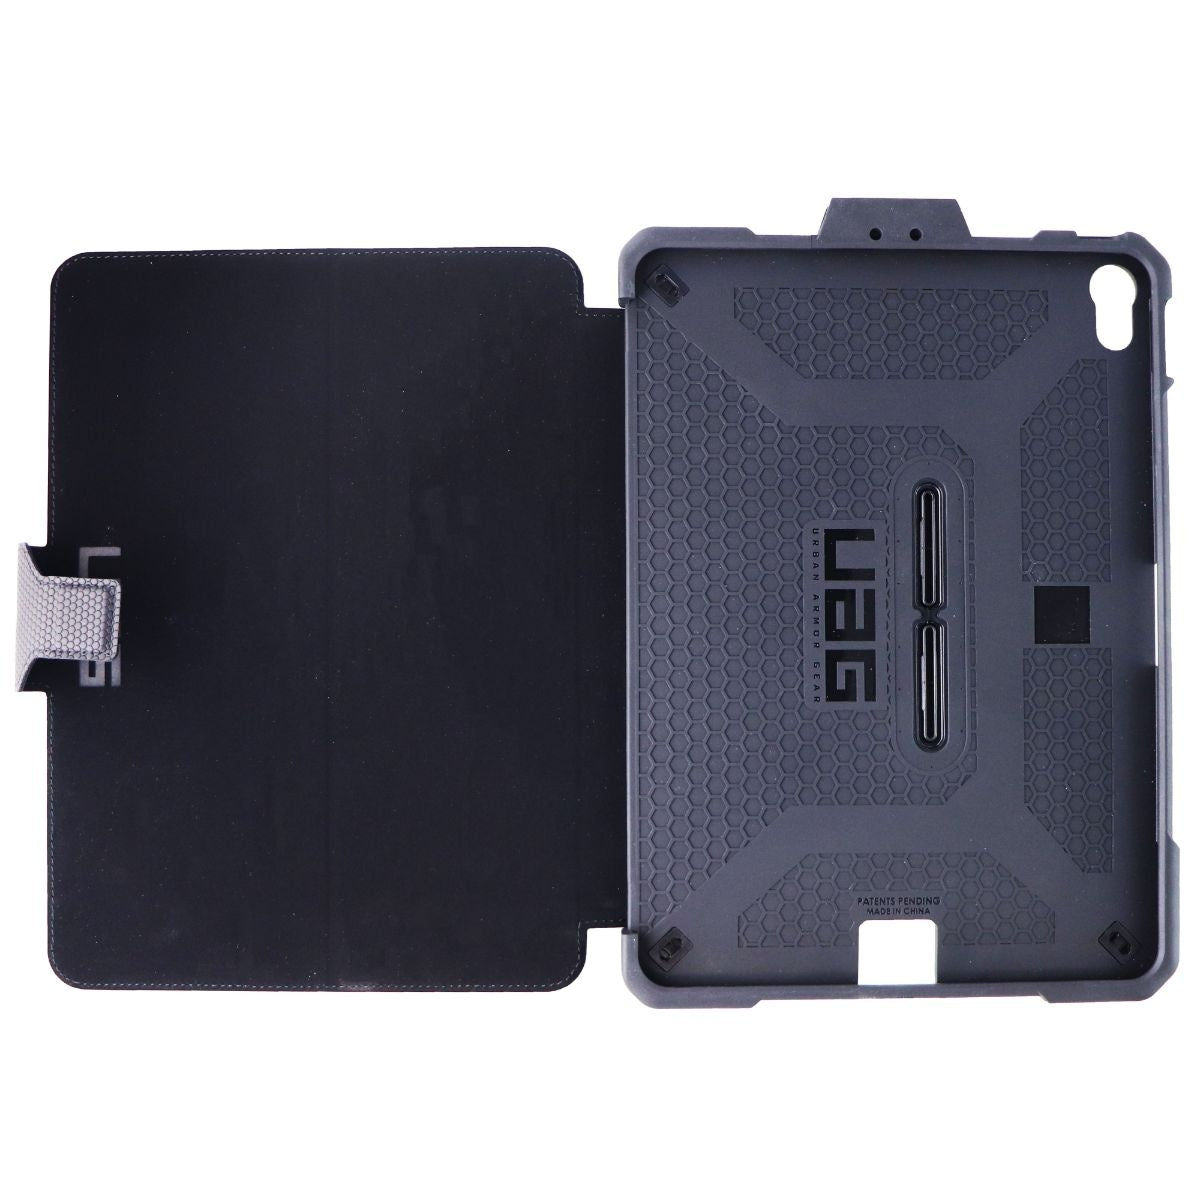 UAG Metropolis Folio Protection Case for iPad Pro 11-inch (2018 Model) - Black iPad/Tablet Accessories - Cases, Covers, Keyboard Folios Urban Armor Gear    - Simple Cell Bulk Wholesale Pricing - USA Seller